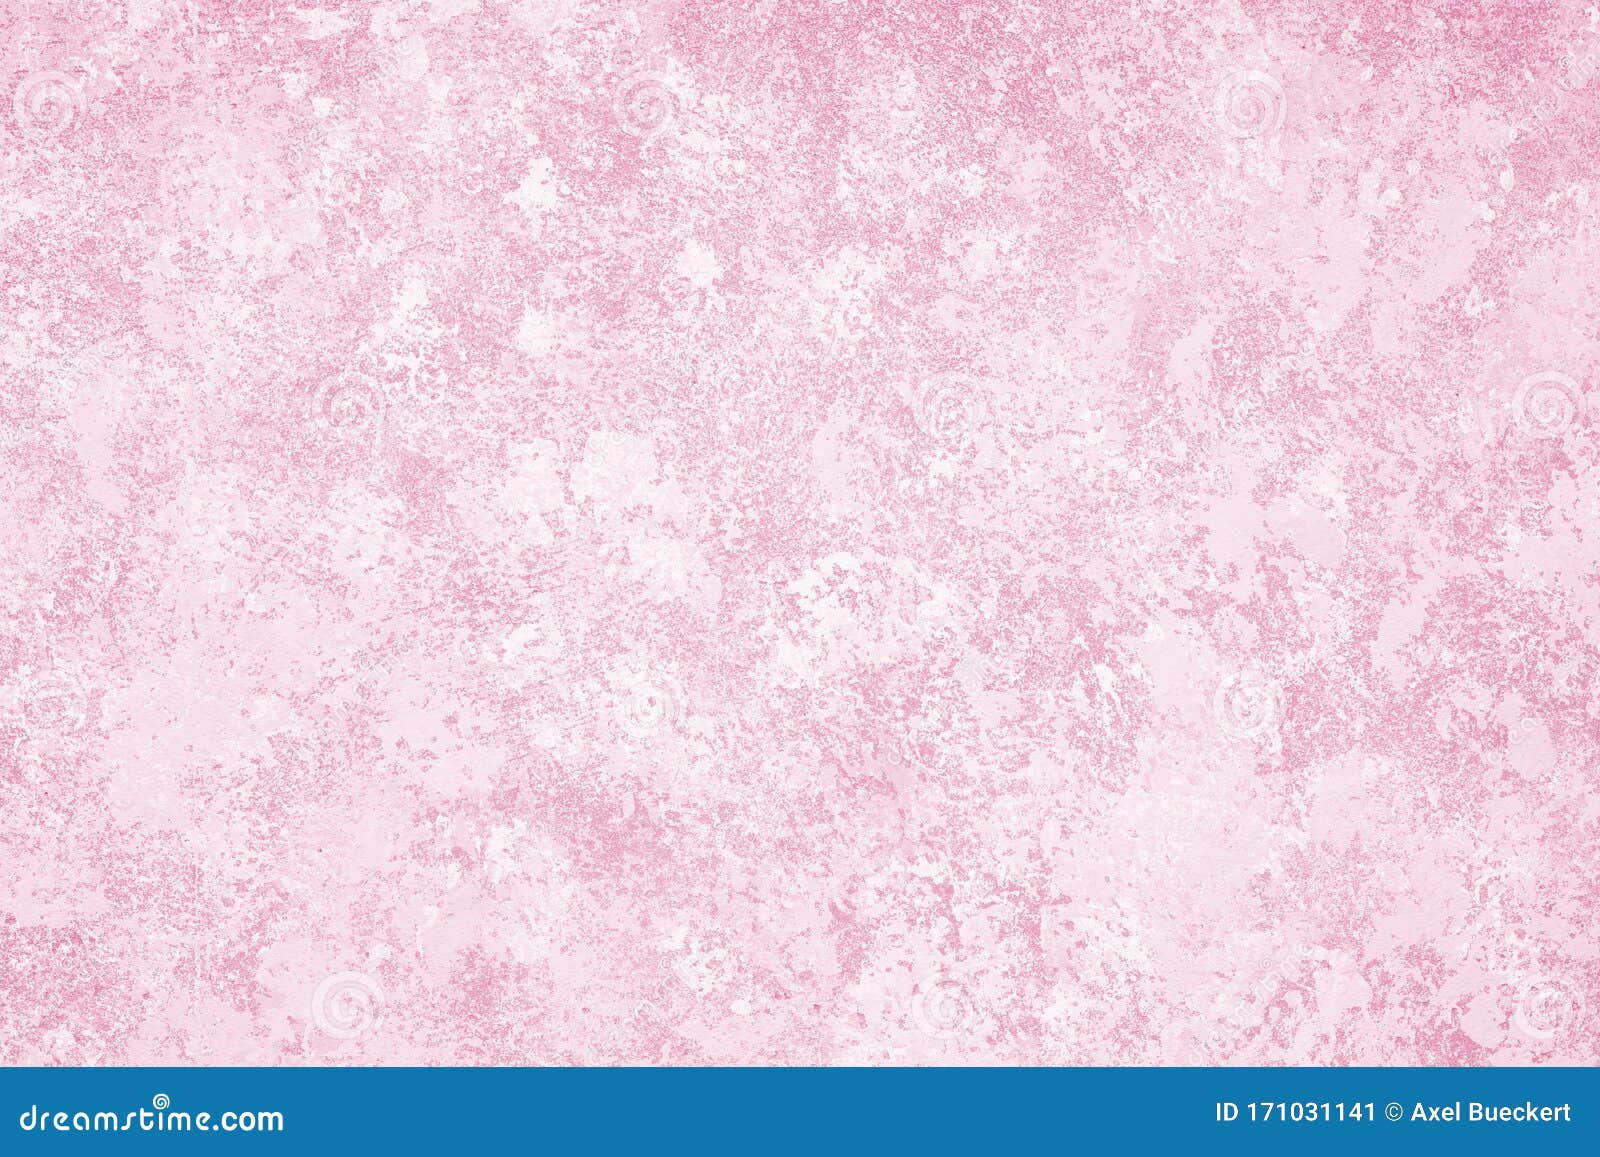 pink wall background with sponge paint texture